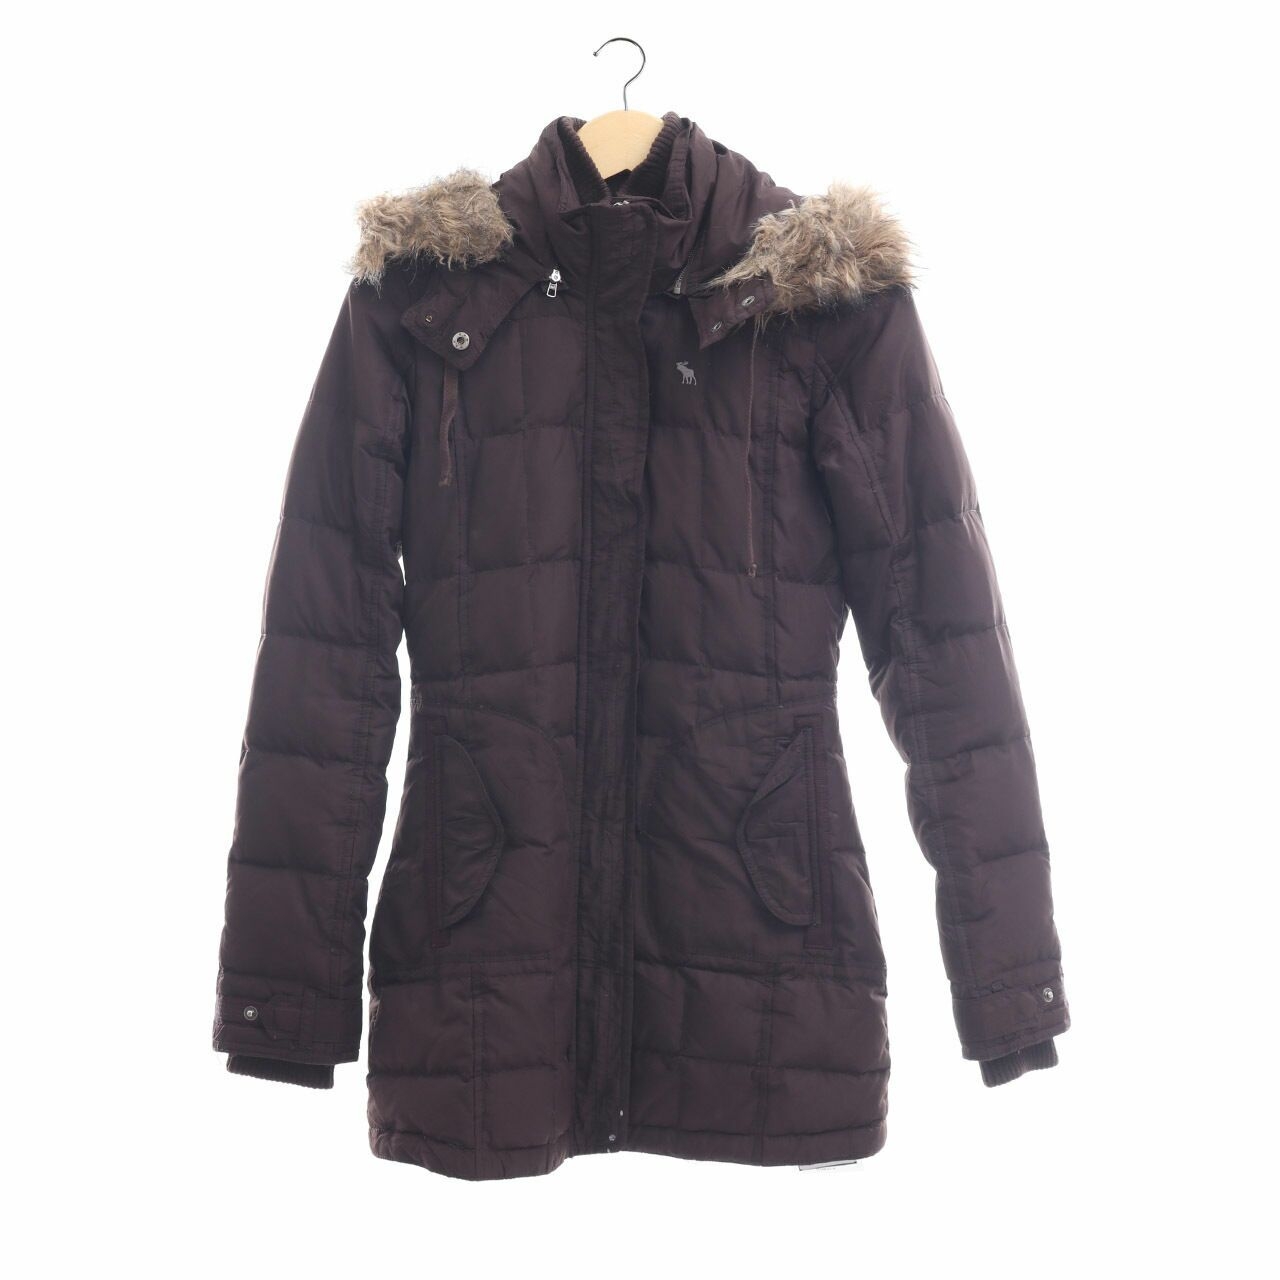 Abercrombie & Fitch Brown Coat